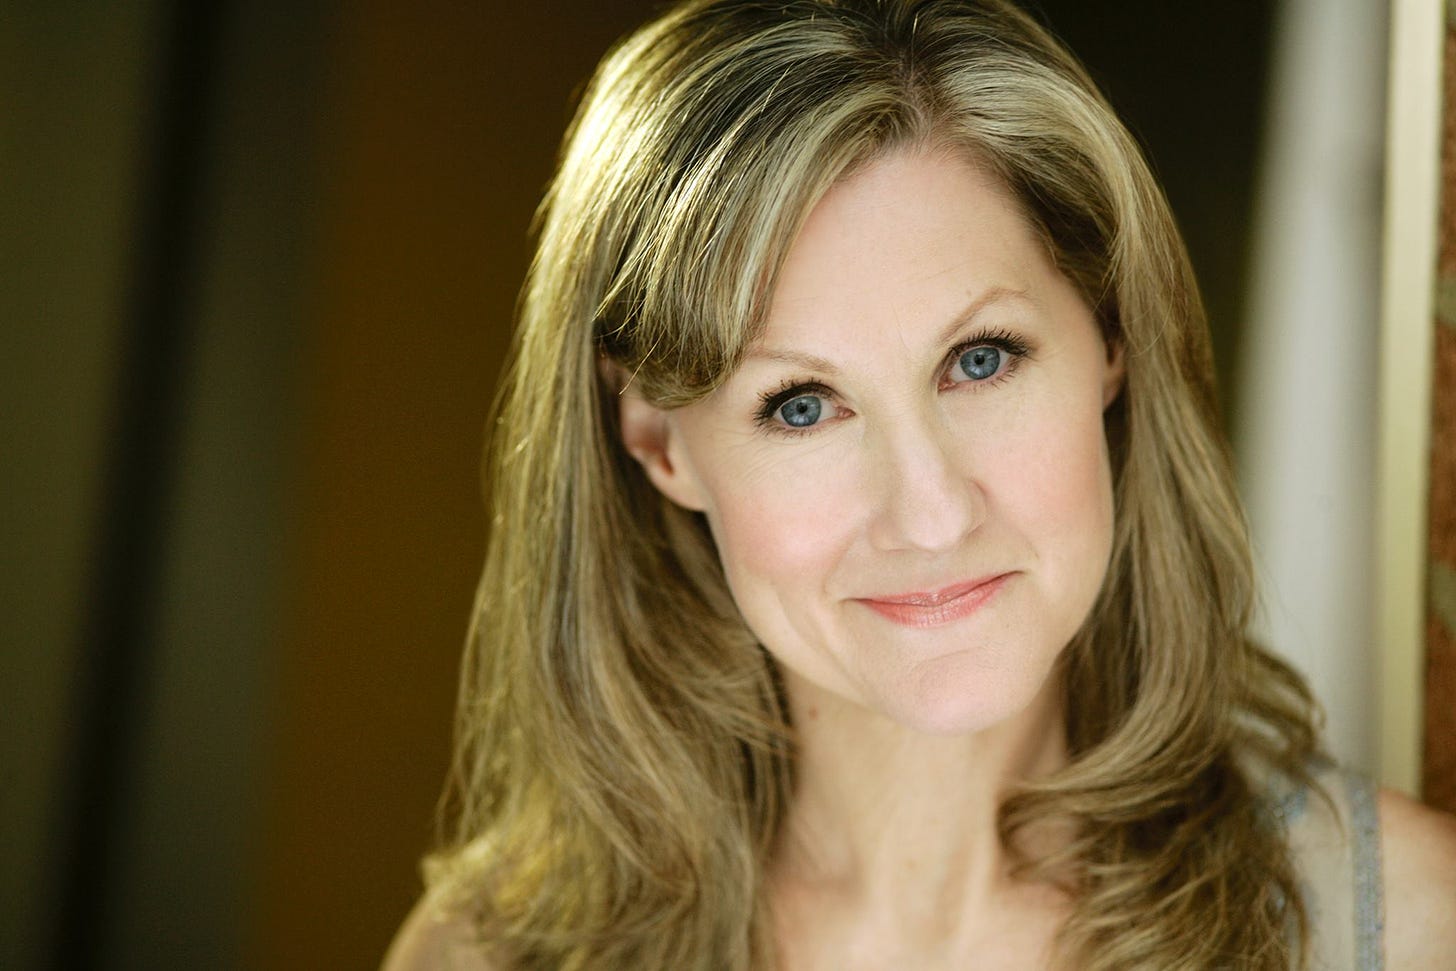 Veronica Taylor narrated the audio book version of Monster Kids. She was the voice of Ash Ketchum in the English dub of the Pokémon anime, and voiced many other characters, including Delia Ketchum (Ash’s mother) and May